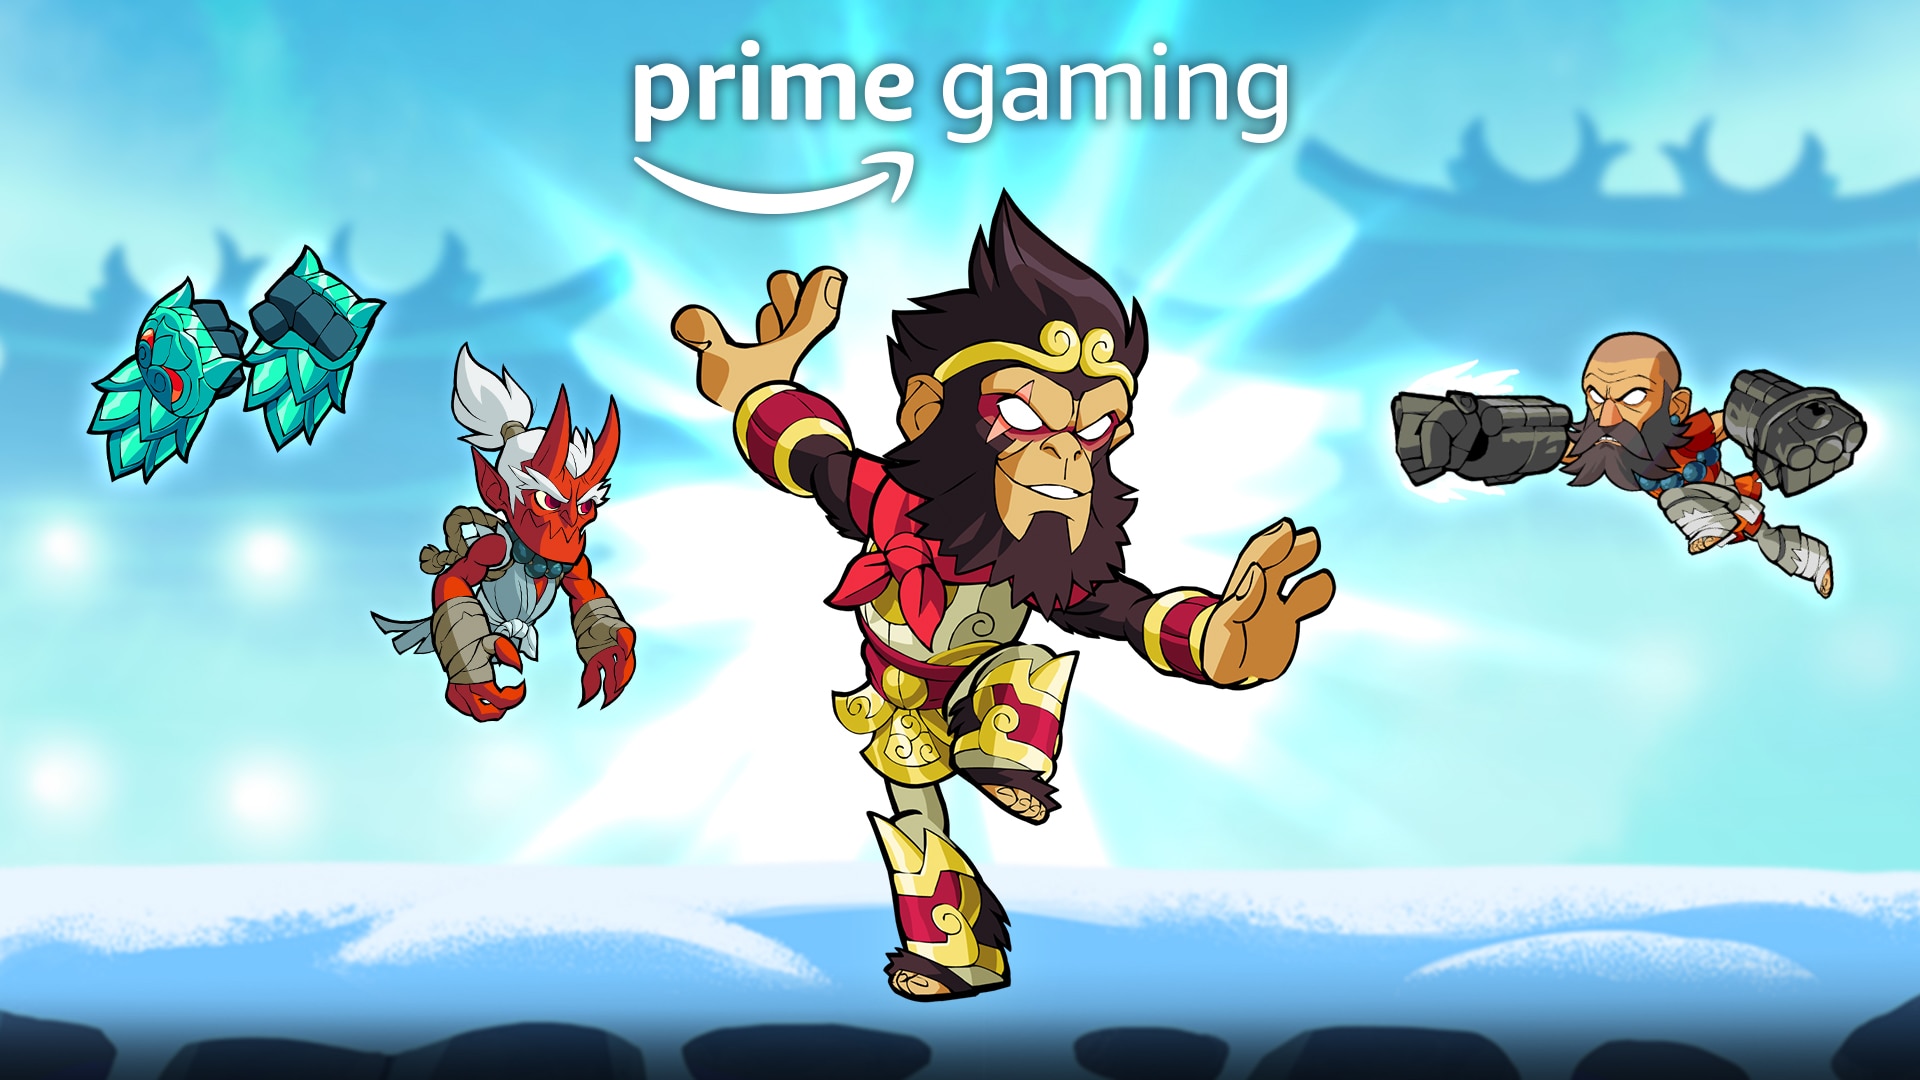 Get the Enlightened Bundle with Prime Gaming